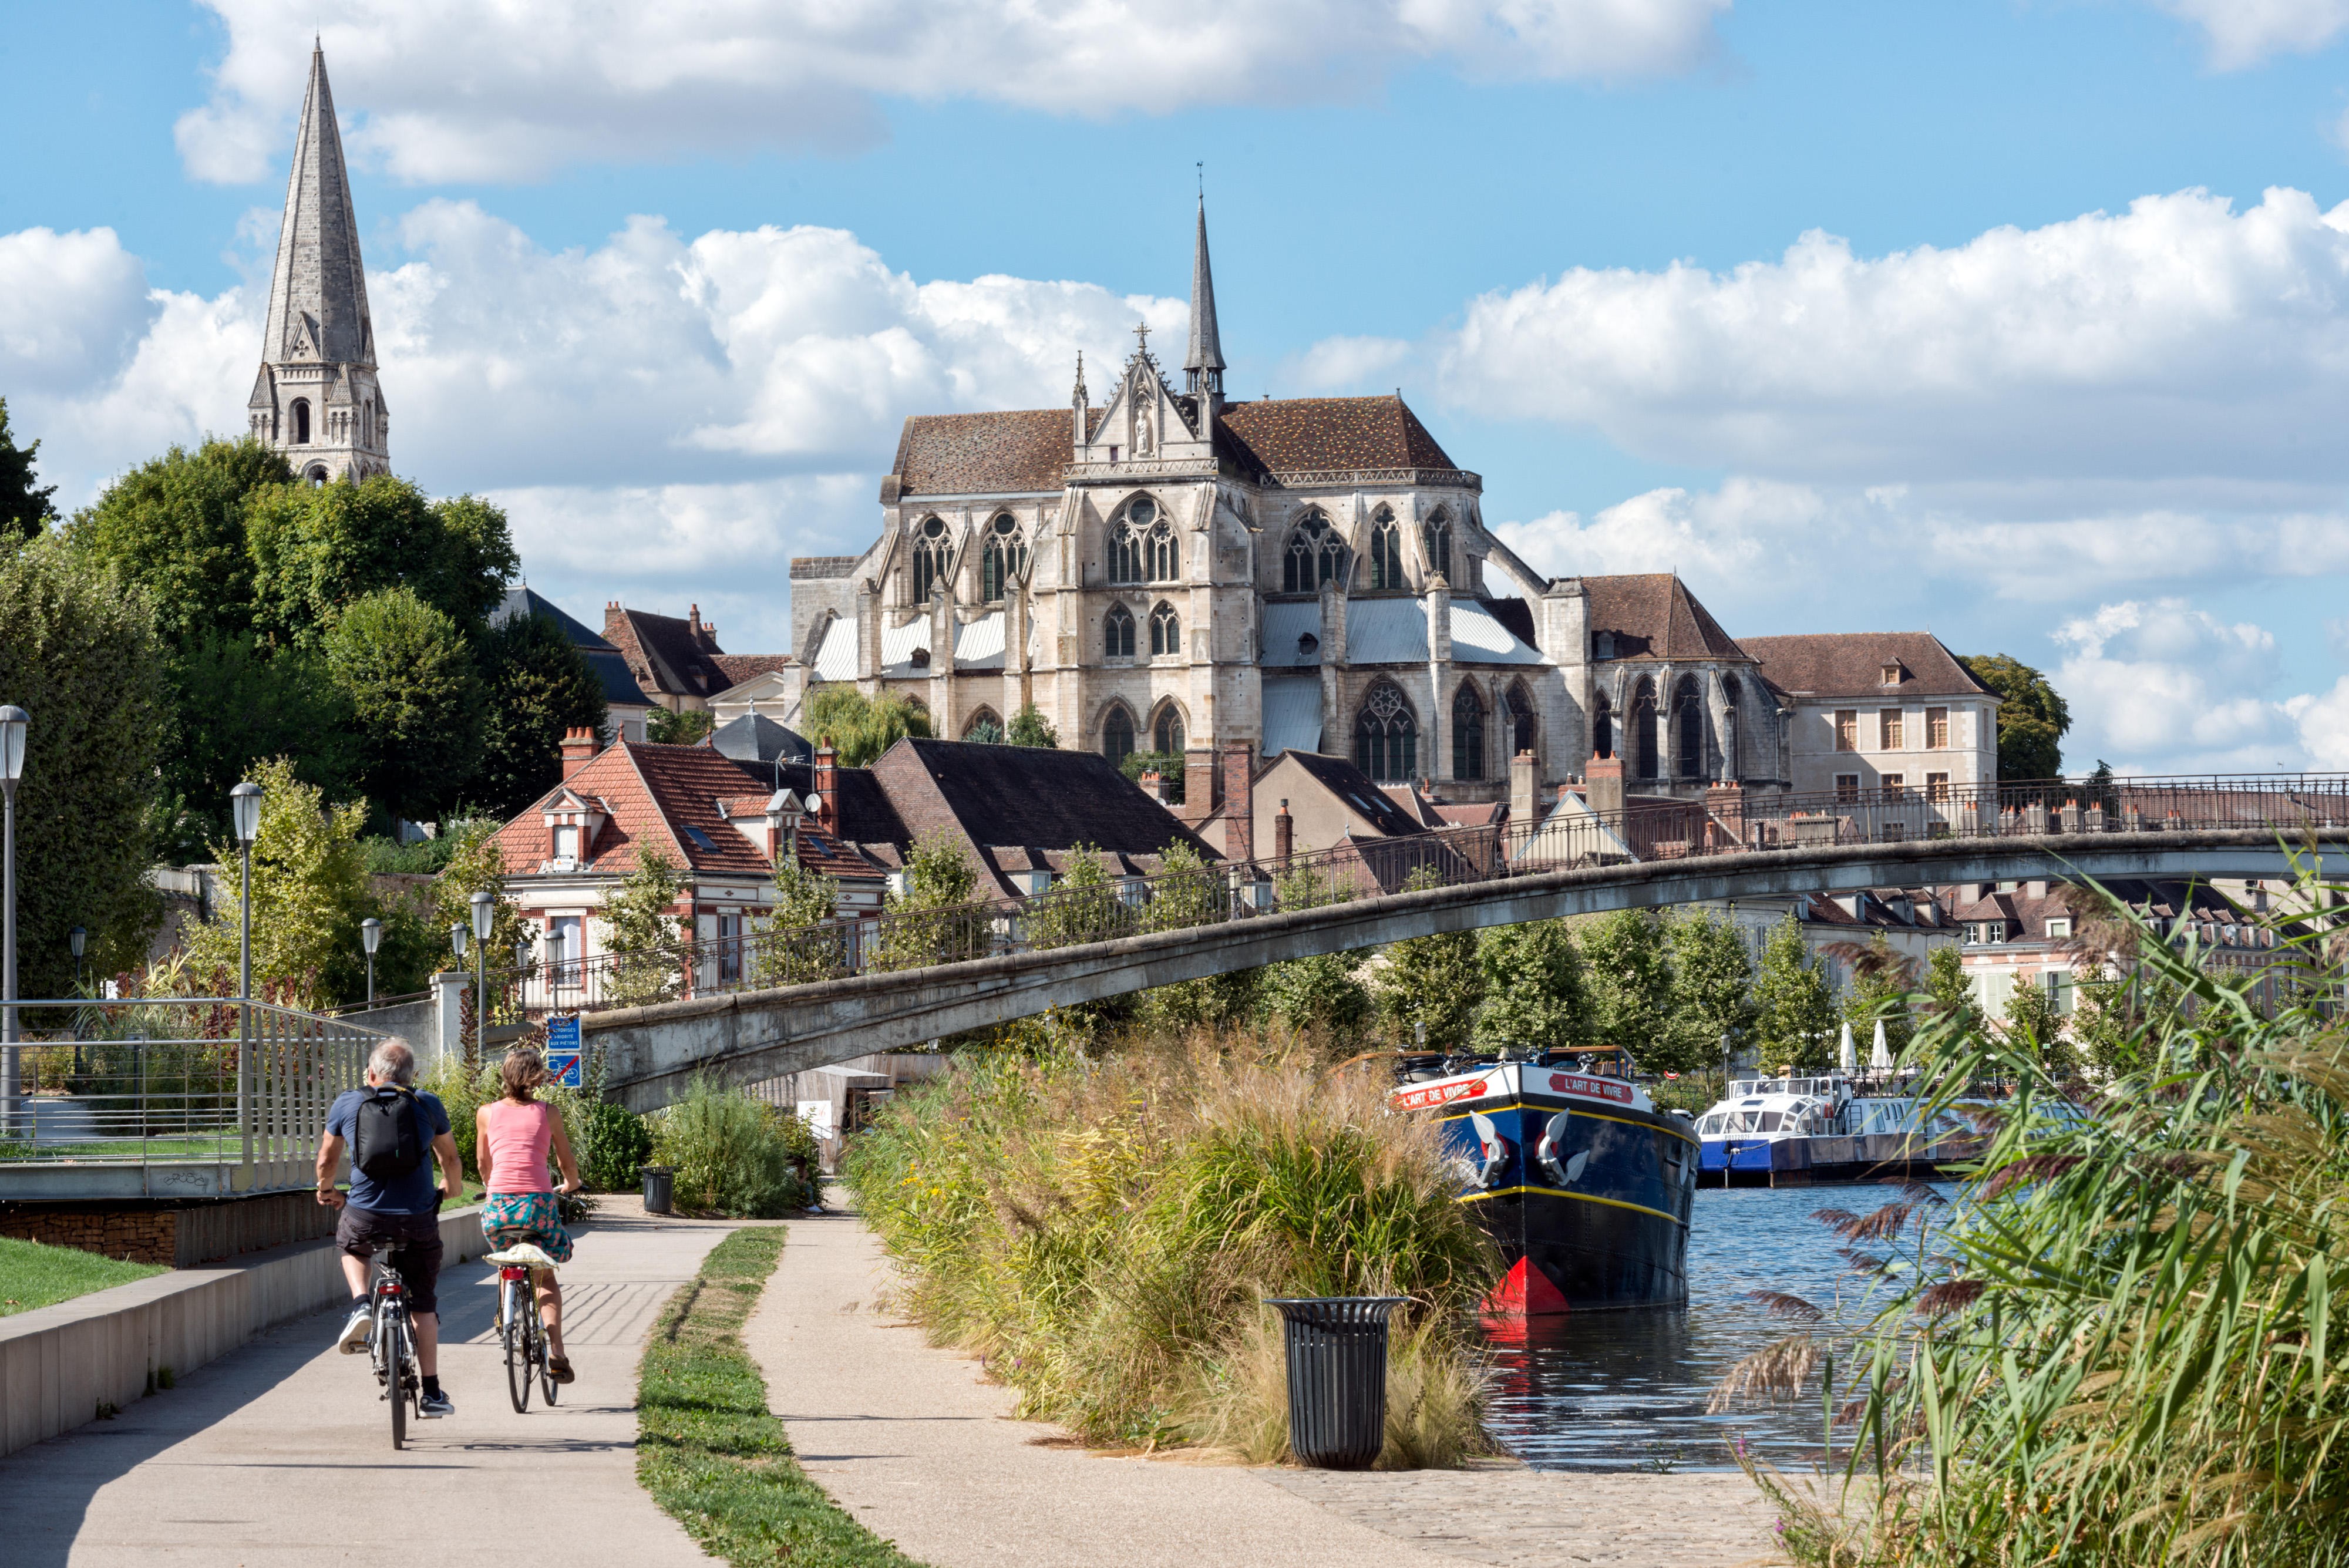 The Abbey of Saint-Germain d’Auxerre in Auxerre, Burgundy. Photo: Alamy